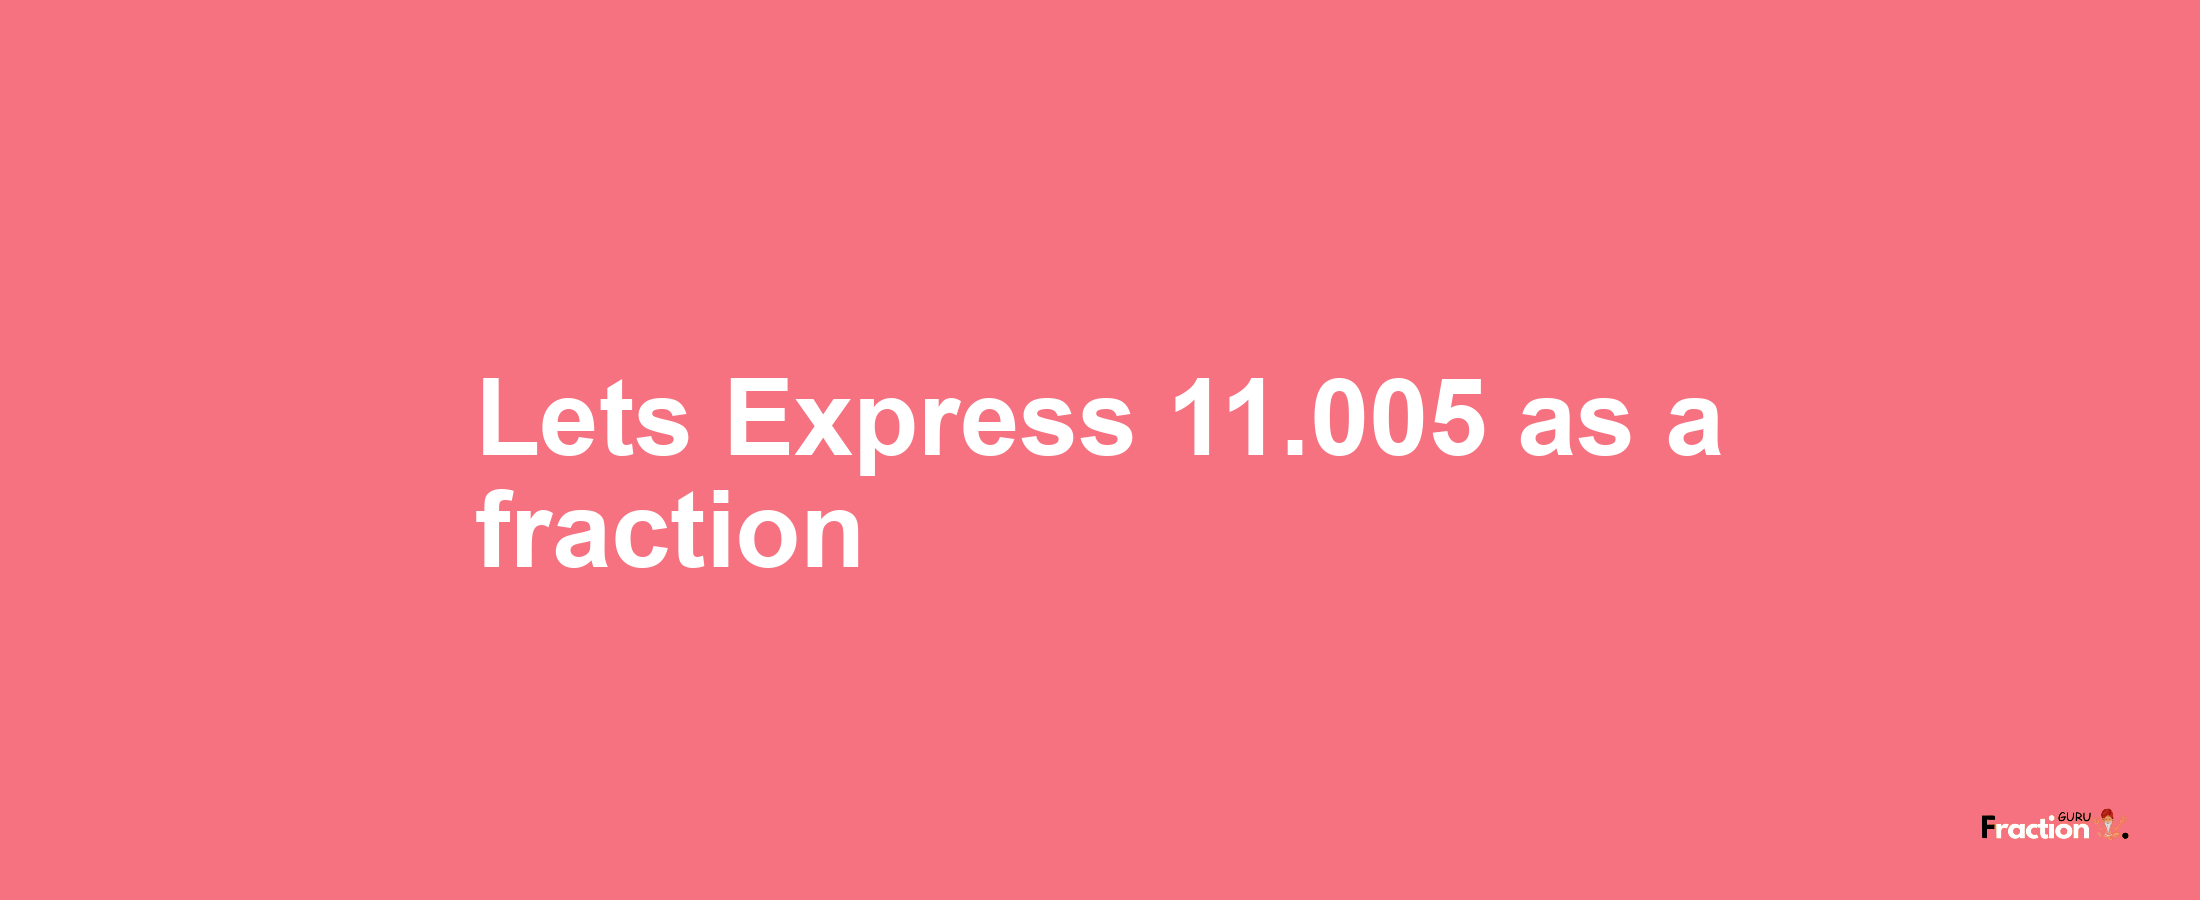 Lets Express 11.005 as afraction